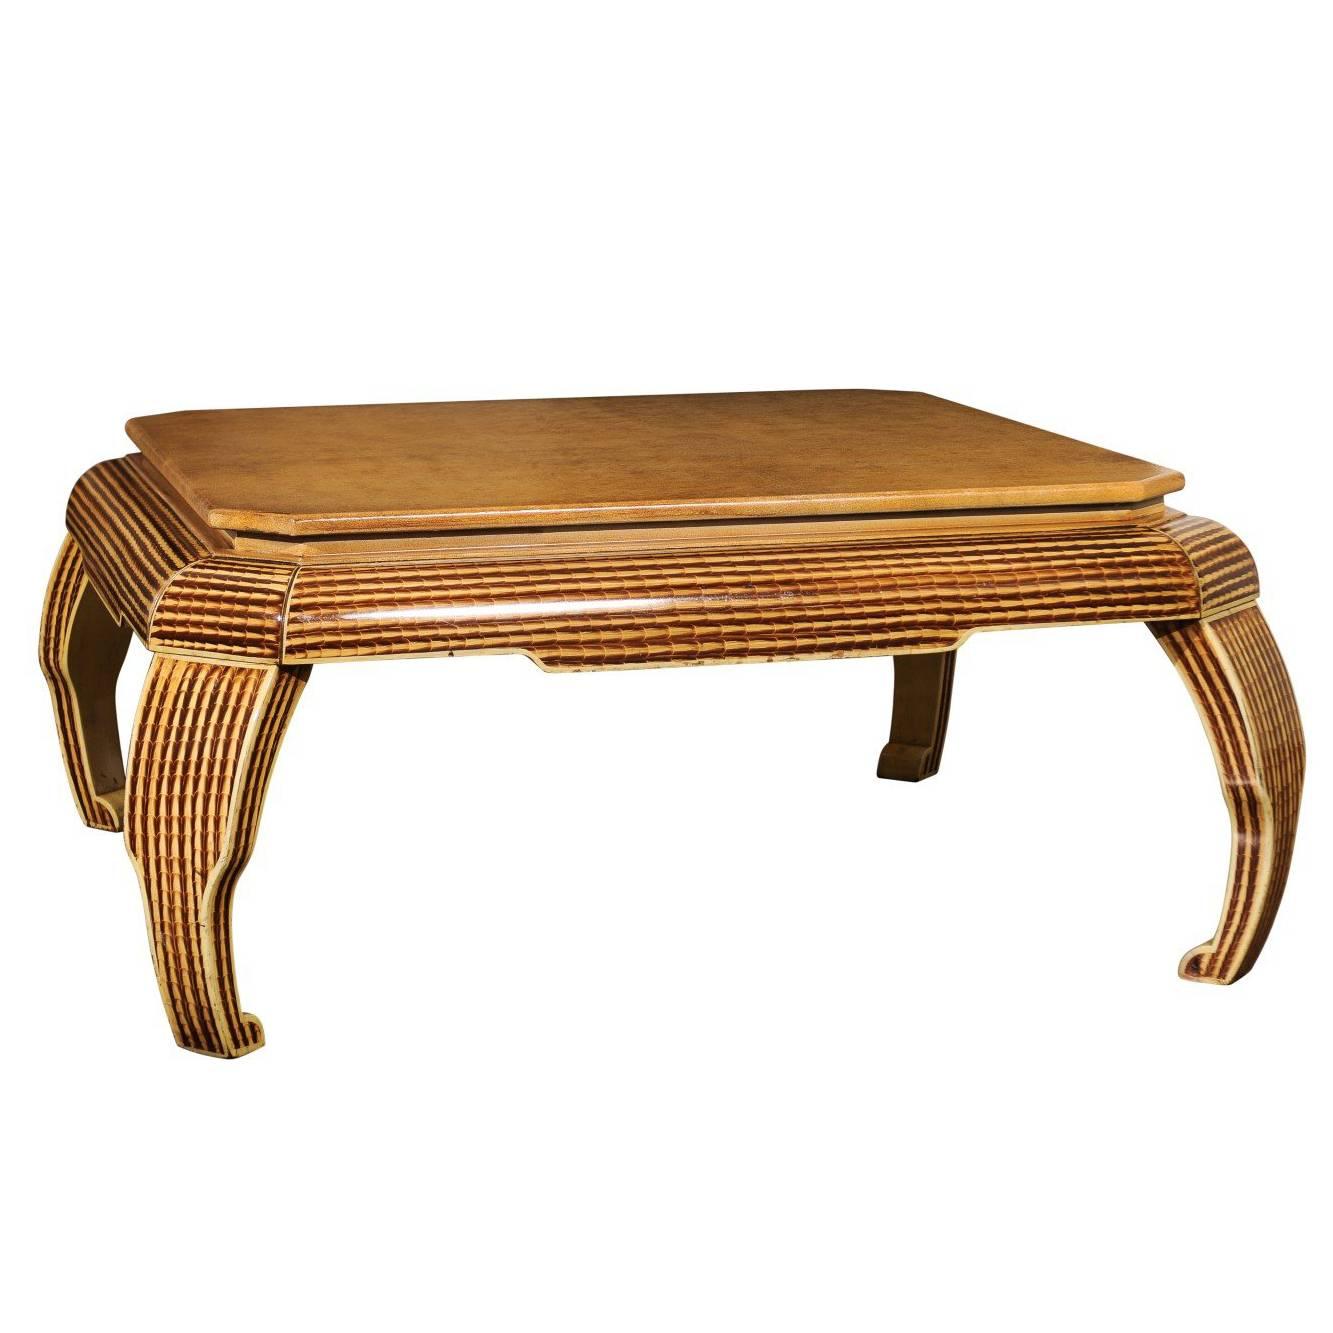 Exquisite Hand-Painted Coffee Table by Alessandro for Baker, circa 1985 For Sale